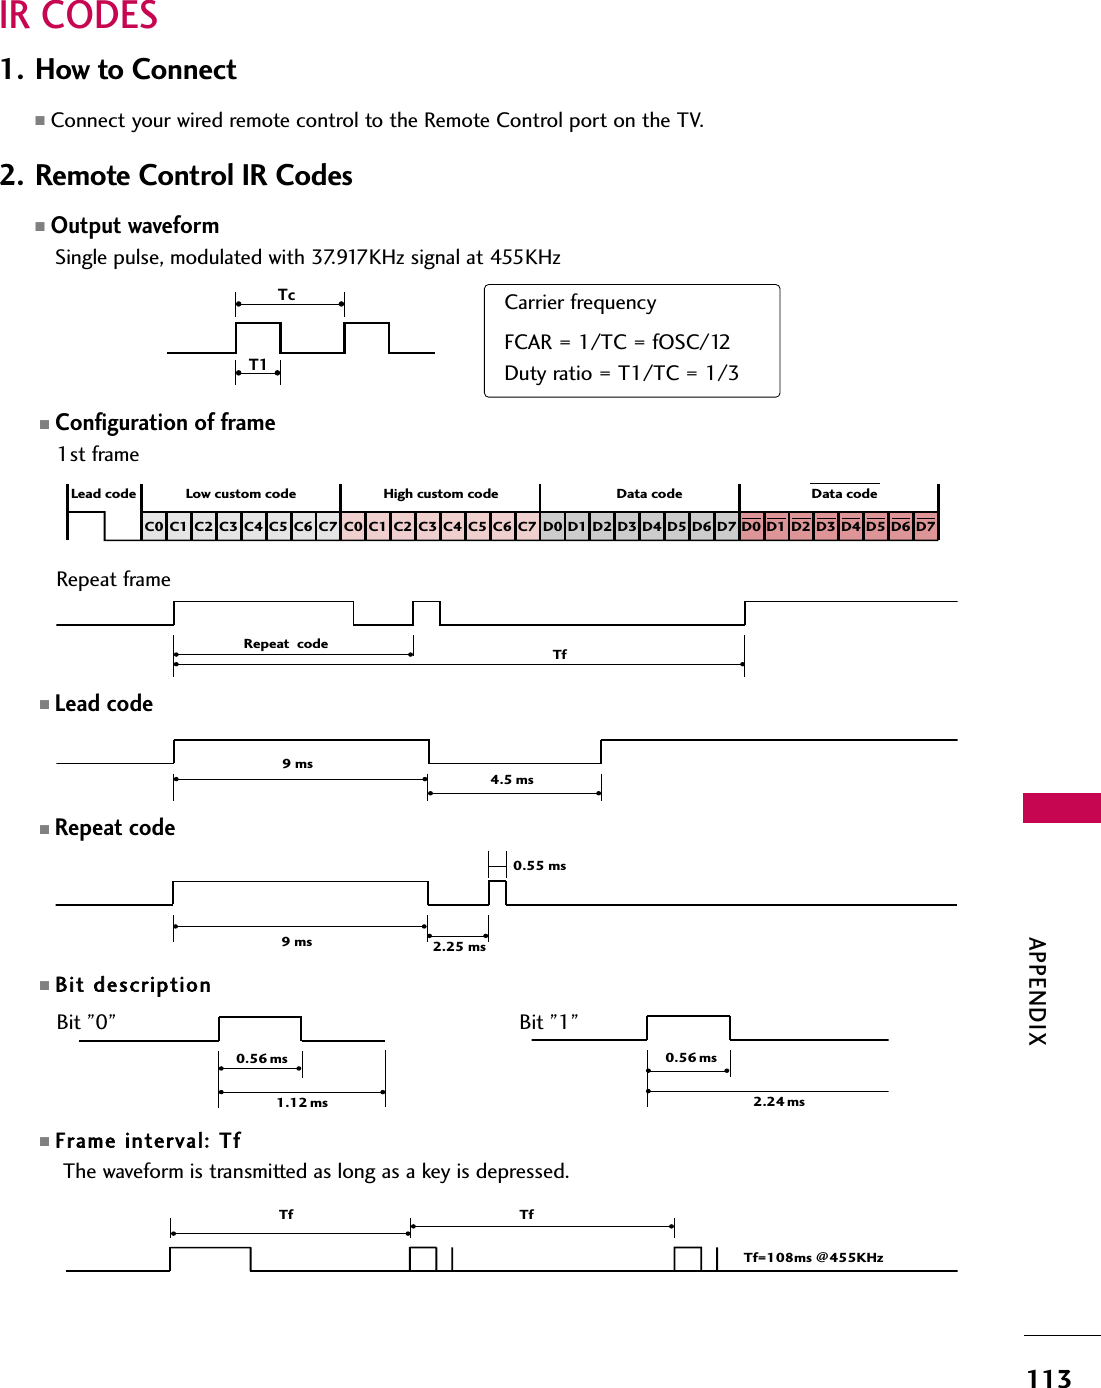 APPENDIX113IR CODES■Configuration of frame 1st frameRepeat frame■Lead code■Repeat code■Bit description■Frame interval: Tf The waveform is transmitted as long as a key is depressed.C0 C1 C2 C3 C4 C5 C6 C7 C0 C1 C2 C3 C4 C5 C6 C7 D0 D1 D2 D3 D4 D5 D6 D7 D0 D1 D2 D3 D4 D5 D6 D7 Lead code Low custom code High custom code Data code  Data code Repeat  code Tf4.5 ms9 ms 0.56 ms1.12 ms0.56 ms2.24 msTf TfTf=108ms @455KHzBit ”0”  Bit ”1”1. How to Connect■Connect your wired remote control to the Remote Control port on the TV. 2. Remote Control IR Codes■Output waveform Single pulse, modulated with 37.917KHz signal at 455KHz   T1Tc Carrier frequencyFCAR = 1/TC = fOSC/12Duty ratio = T1/TC = 1/32.25 ms 9 ms 0.55 ms 